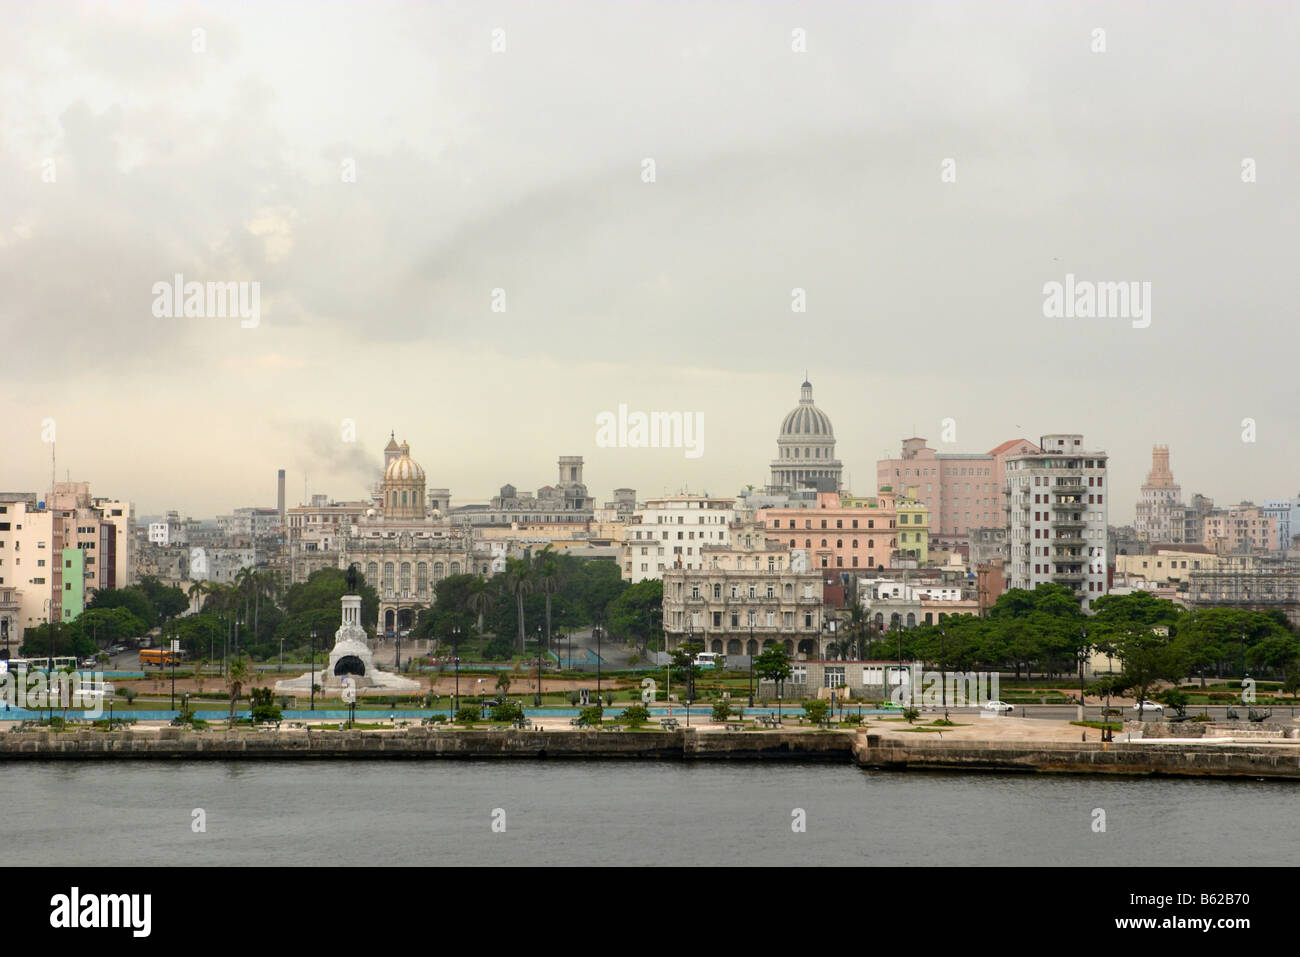 The havana skyline from across the canal de entrada. In the foreground and to the left is a statue of Maximo Gomez. Stock Photo